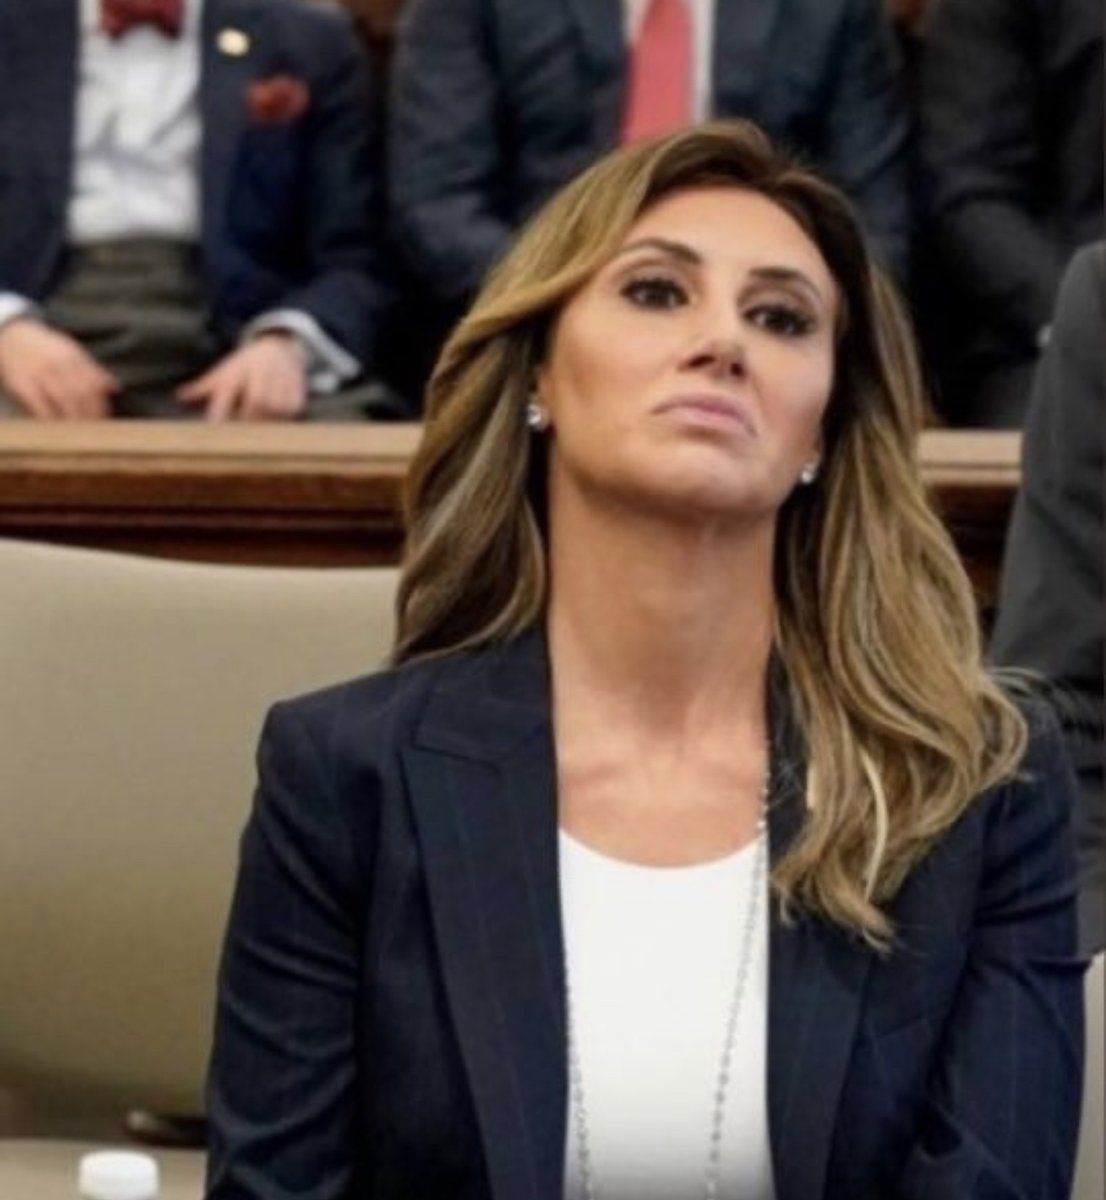 1 of 10/  Body Language Analysis No. 4720: Alina Habba in the Courtroom — Nonverbal and Emotional Intelligence — #BodyLanguage #BehaviorAnalysis #BodyLanguageExpert  #NonverbalCommunication #AlinaHabba #Habba #DonaldTrump